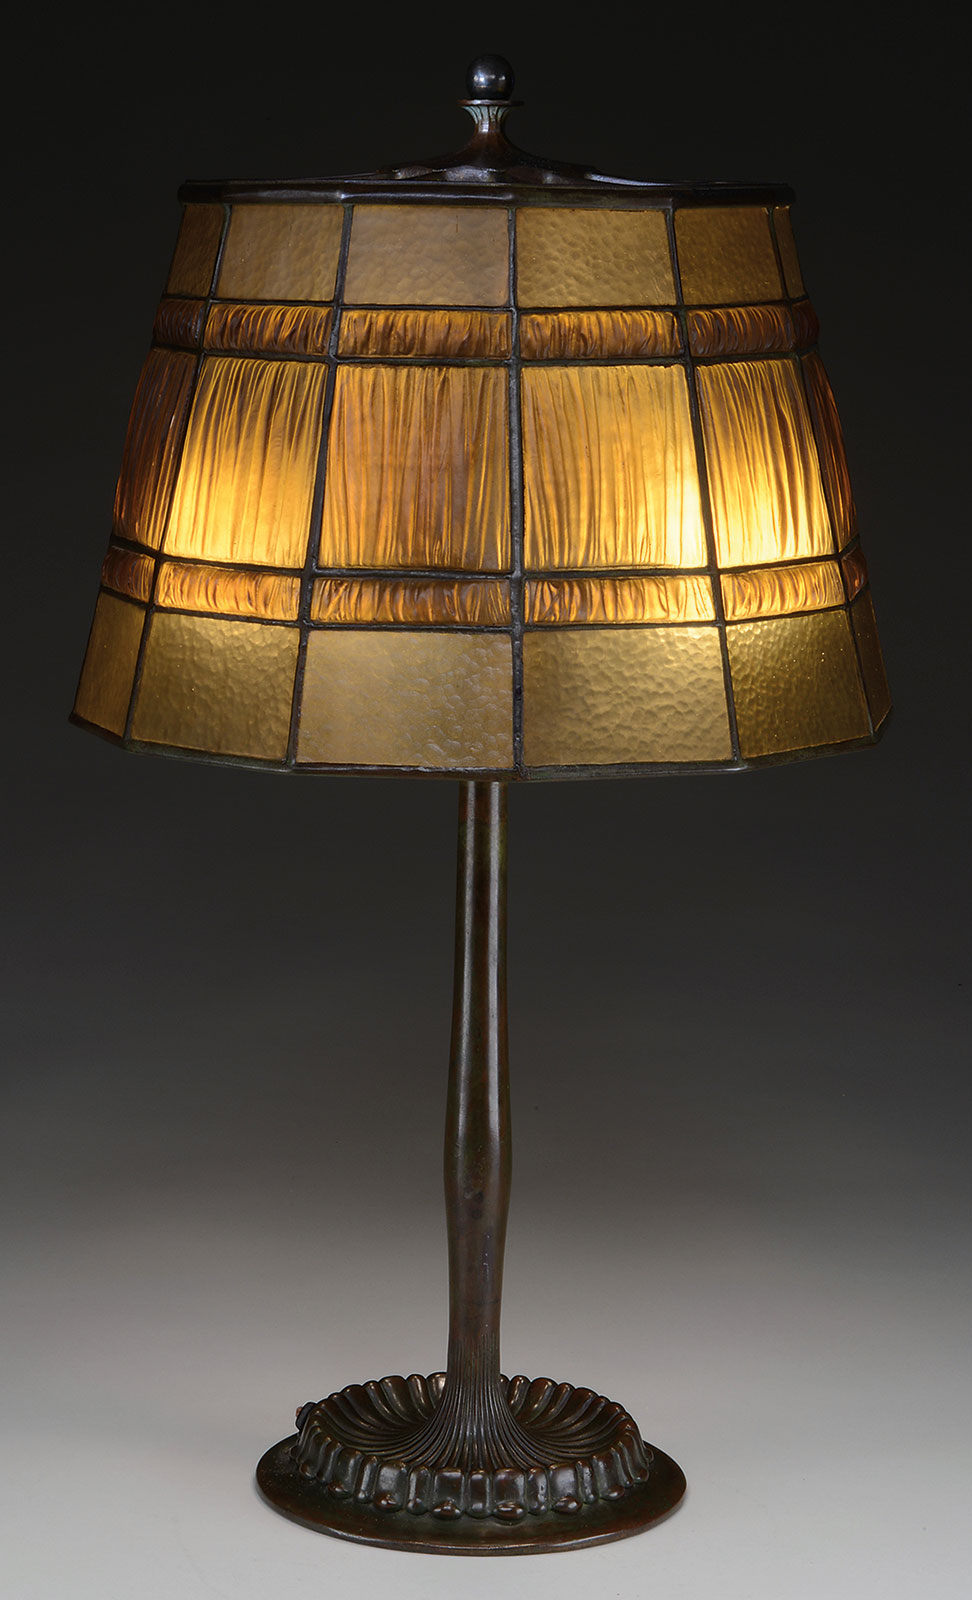 Tiffany Studios Linenfold Table Lamp From The Armstrong Collection